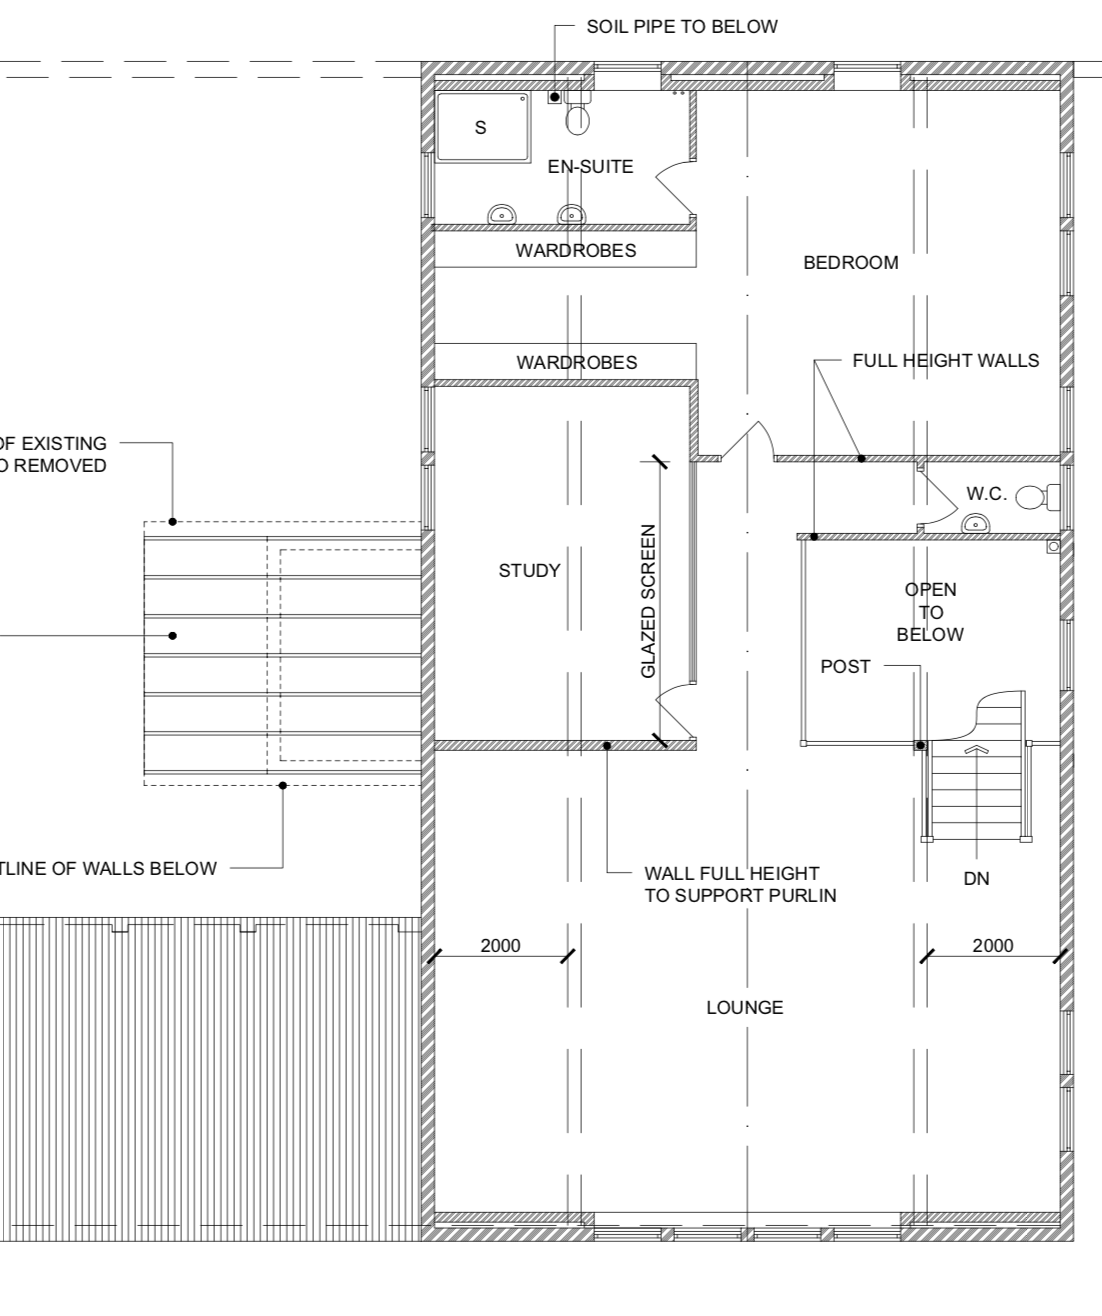 Dean Barn first floor plan cropped .png